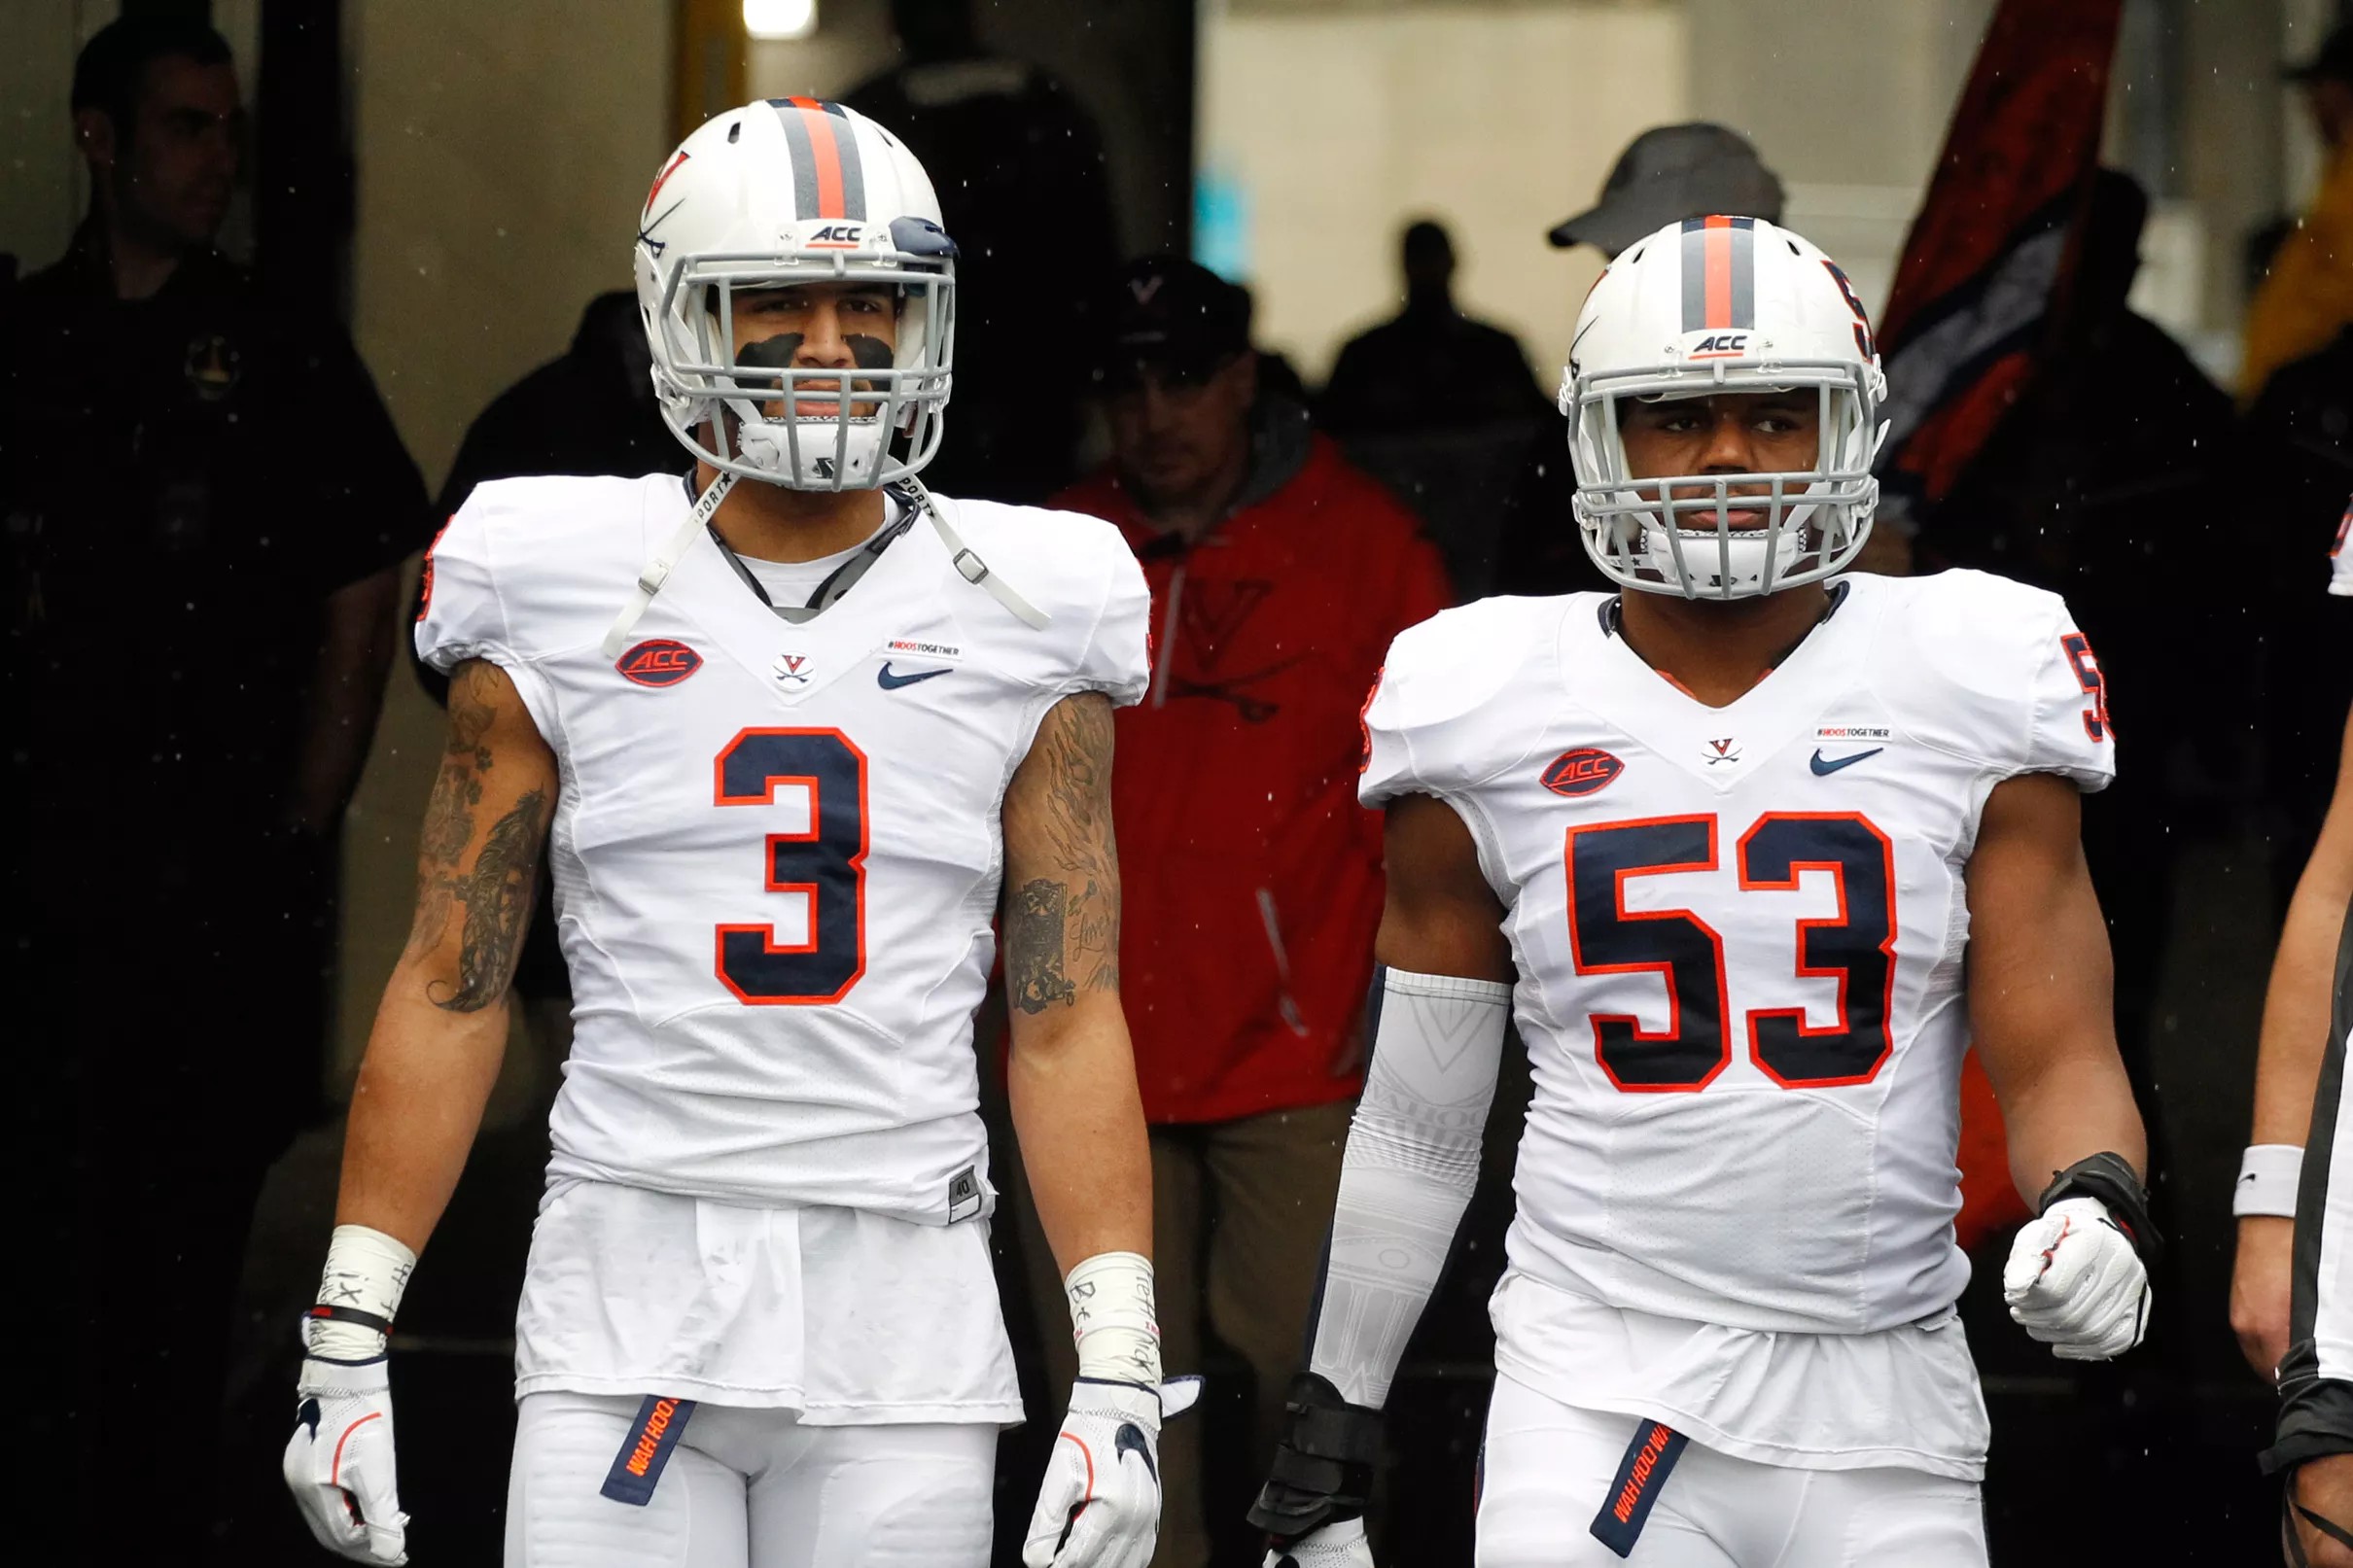 College Football Bowl Selection Day What UVA Fans Need To Know